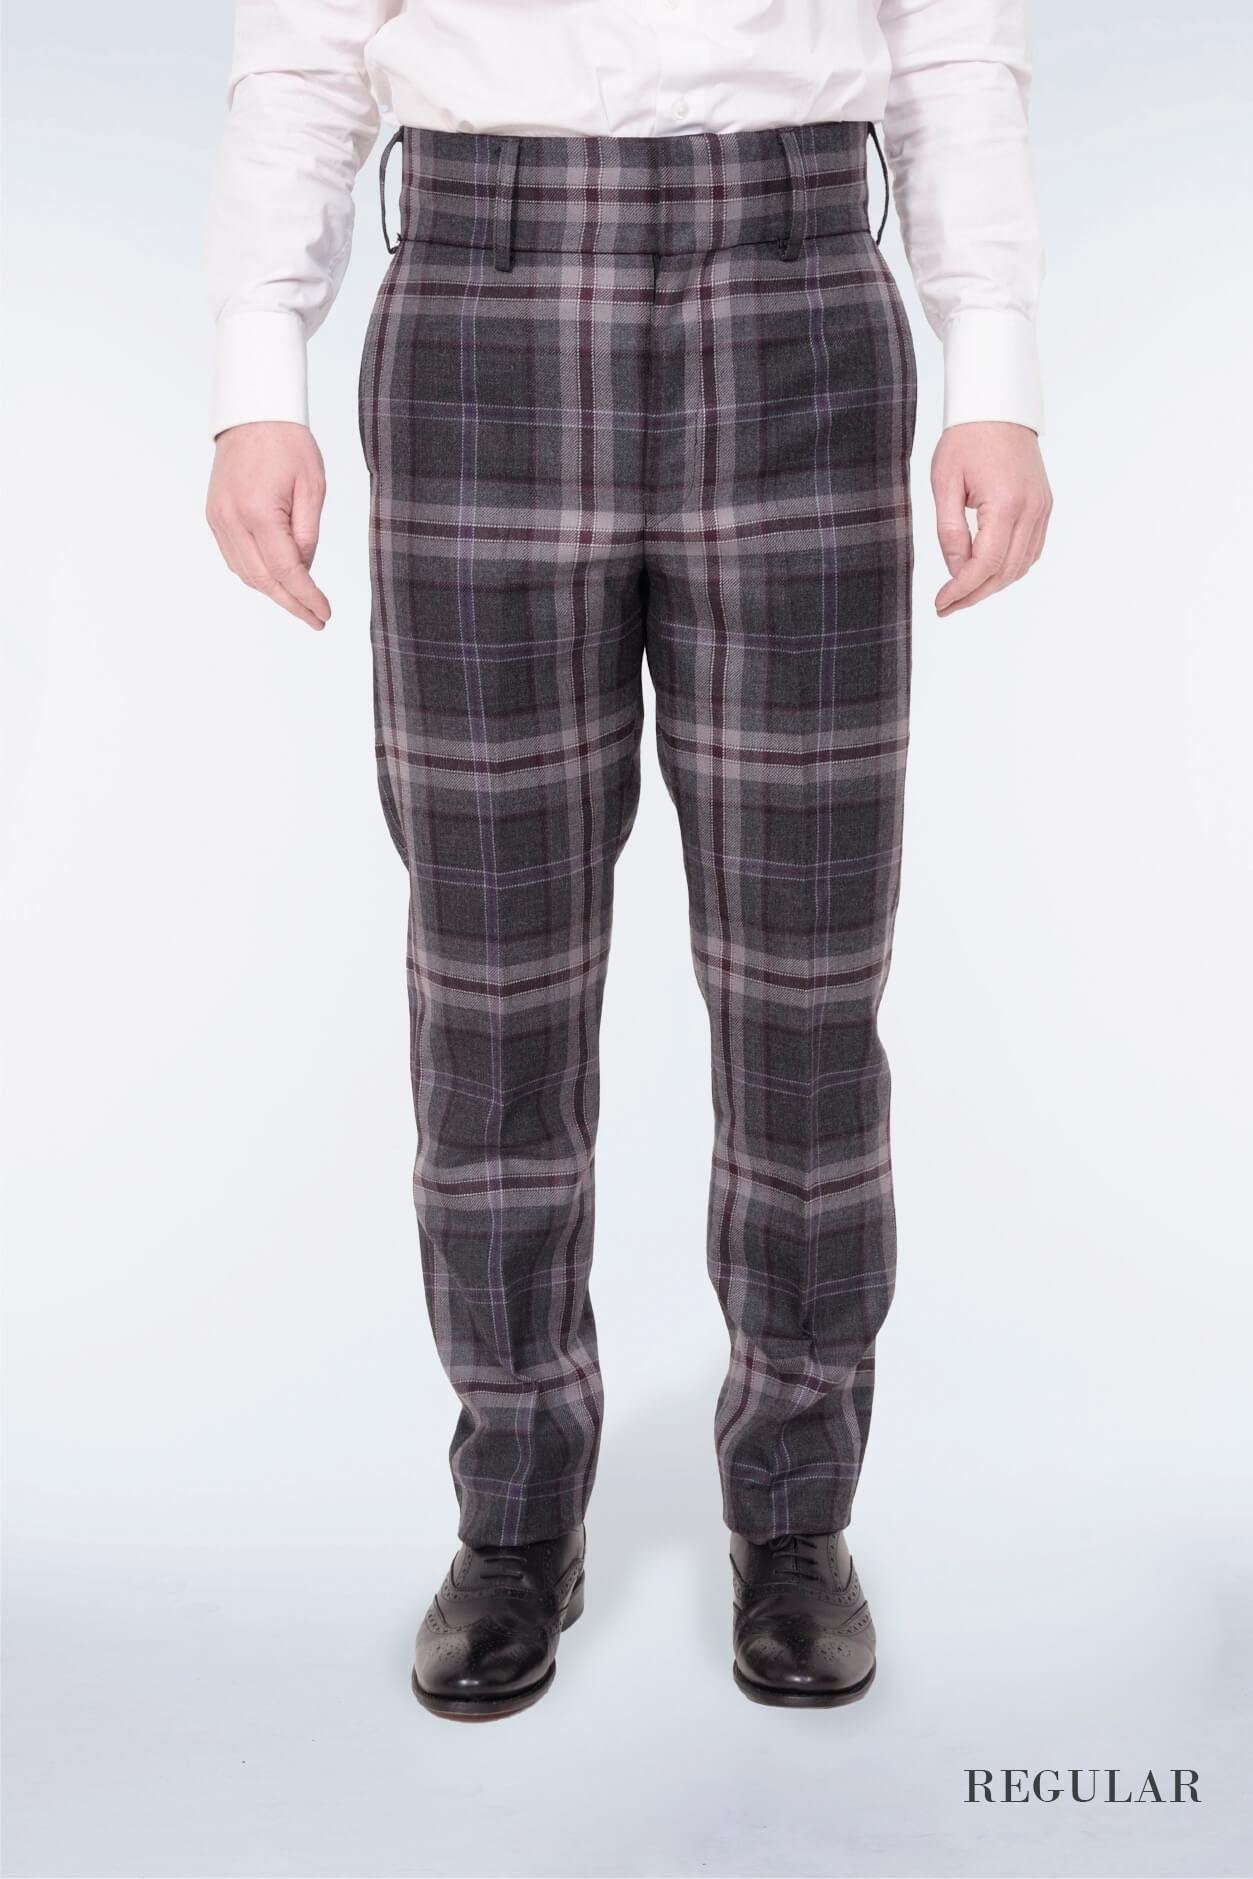 Gorgeous Mens Wedding Suit With Red Tartan Trousers And Vest Fashionable  And Handsome For Business And Leisure Performance From Qackwang, $108.5 |  DHgate.Com